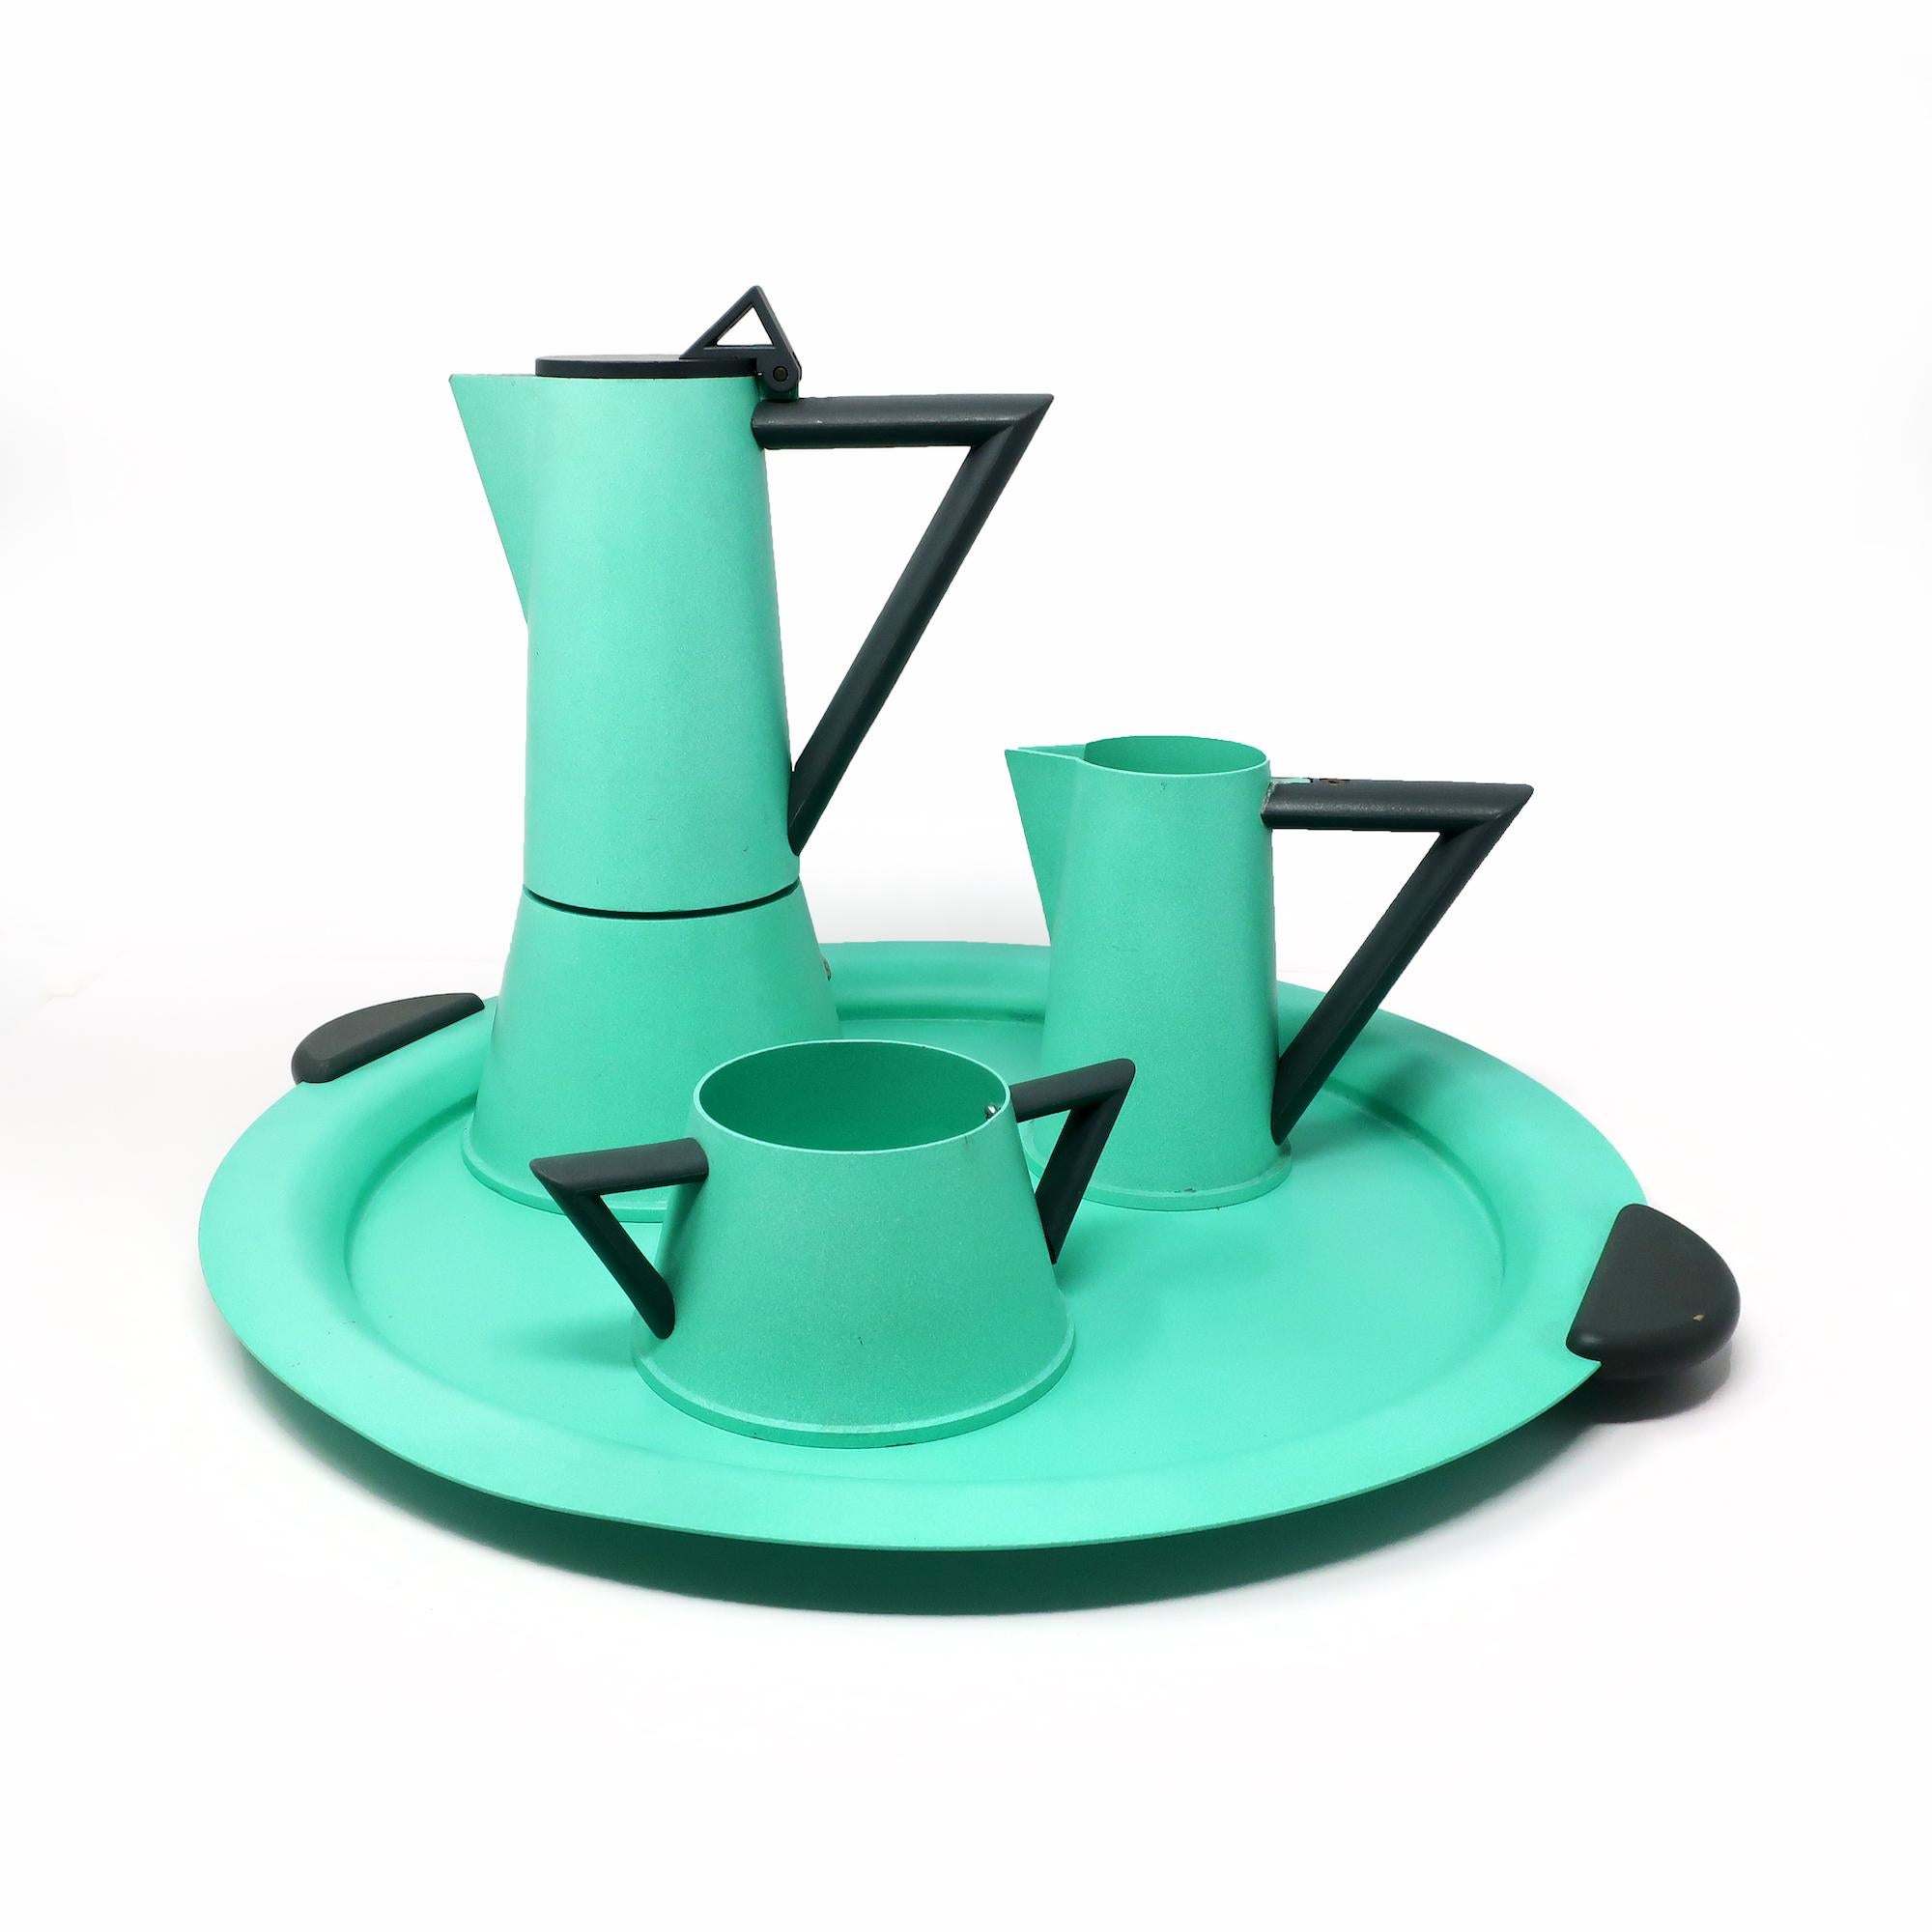 A quintessentially postmodern and very rare coffee set designed by the Memphis Milano master, Ettore Sottsass, for Lagostina's Accademia lin in the 1980s. Made in Italy, this set includes a metal stovetop espresso pot, milk pitcher, sugar bowl, and